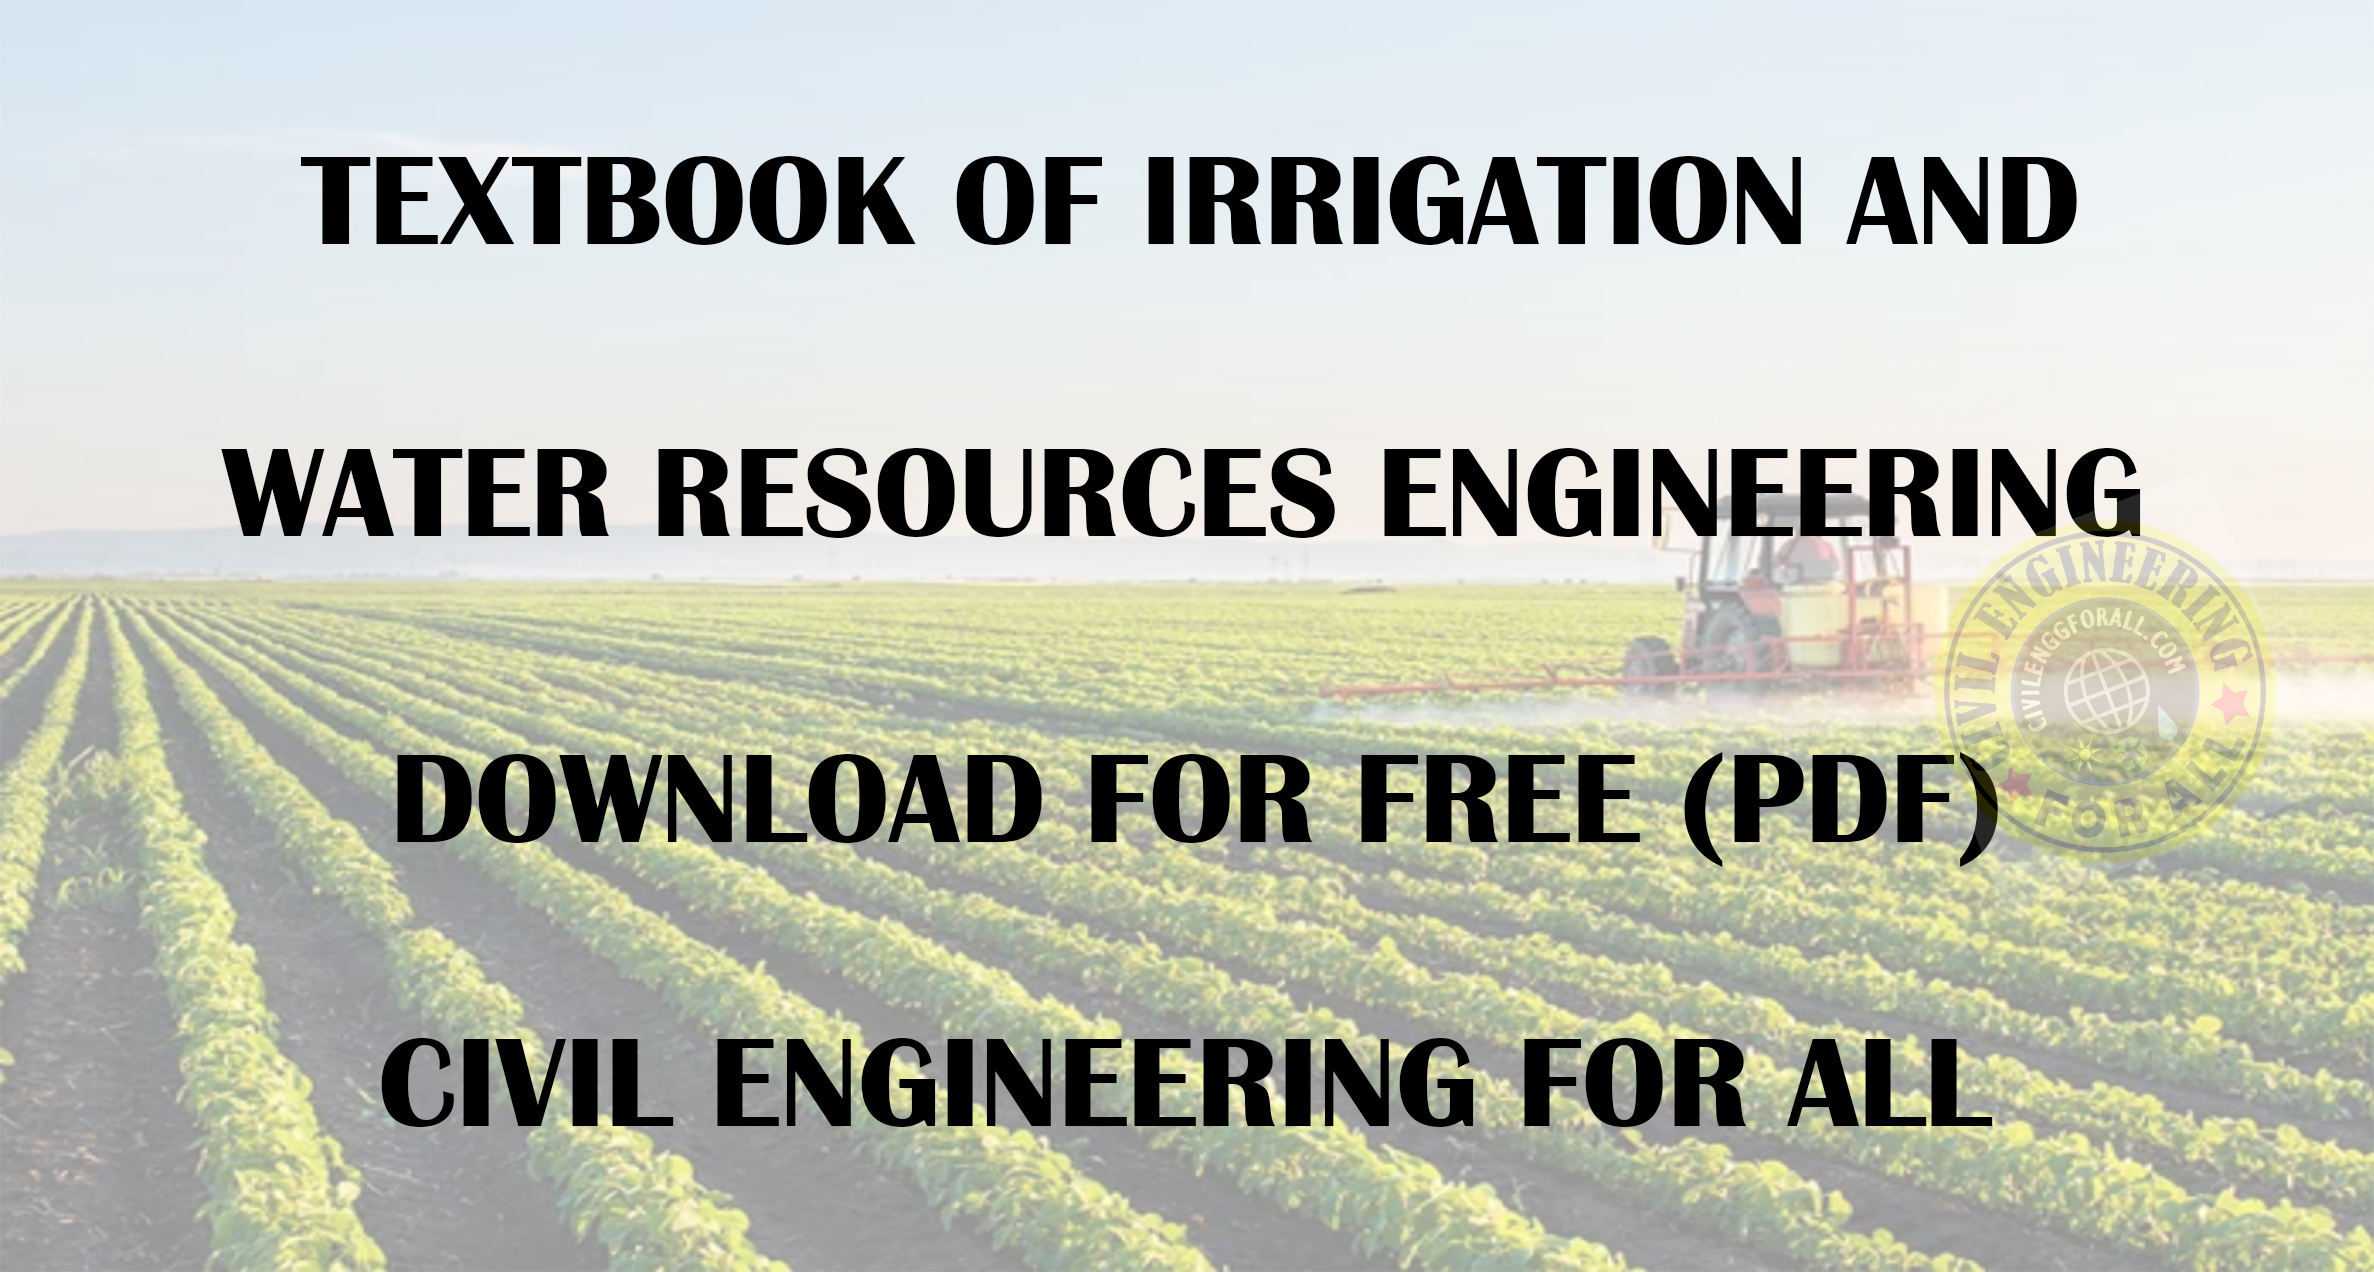 Irrigation and Water Resources Engineering Textbook PDF Free Download CivilEnggForAll